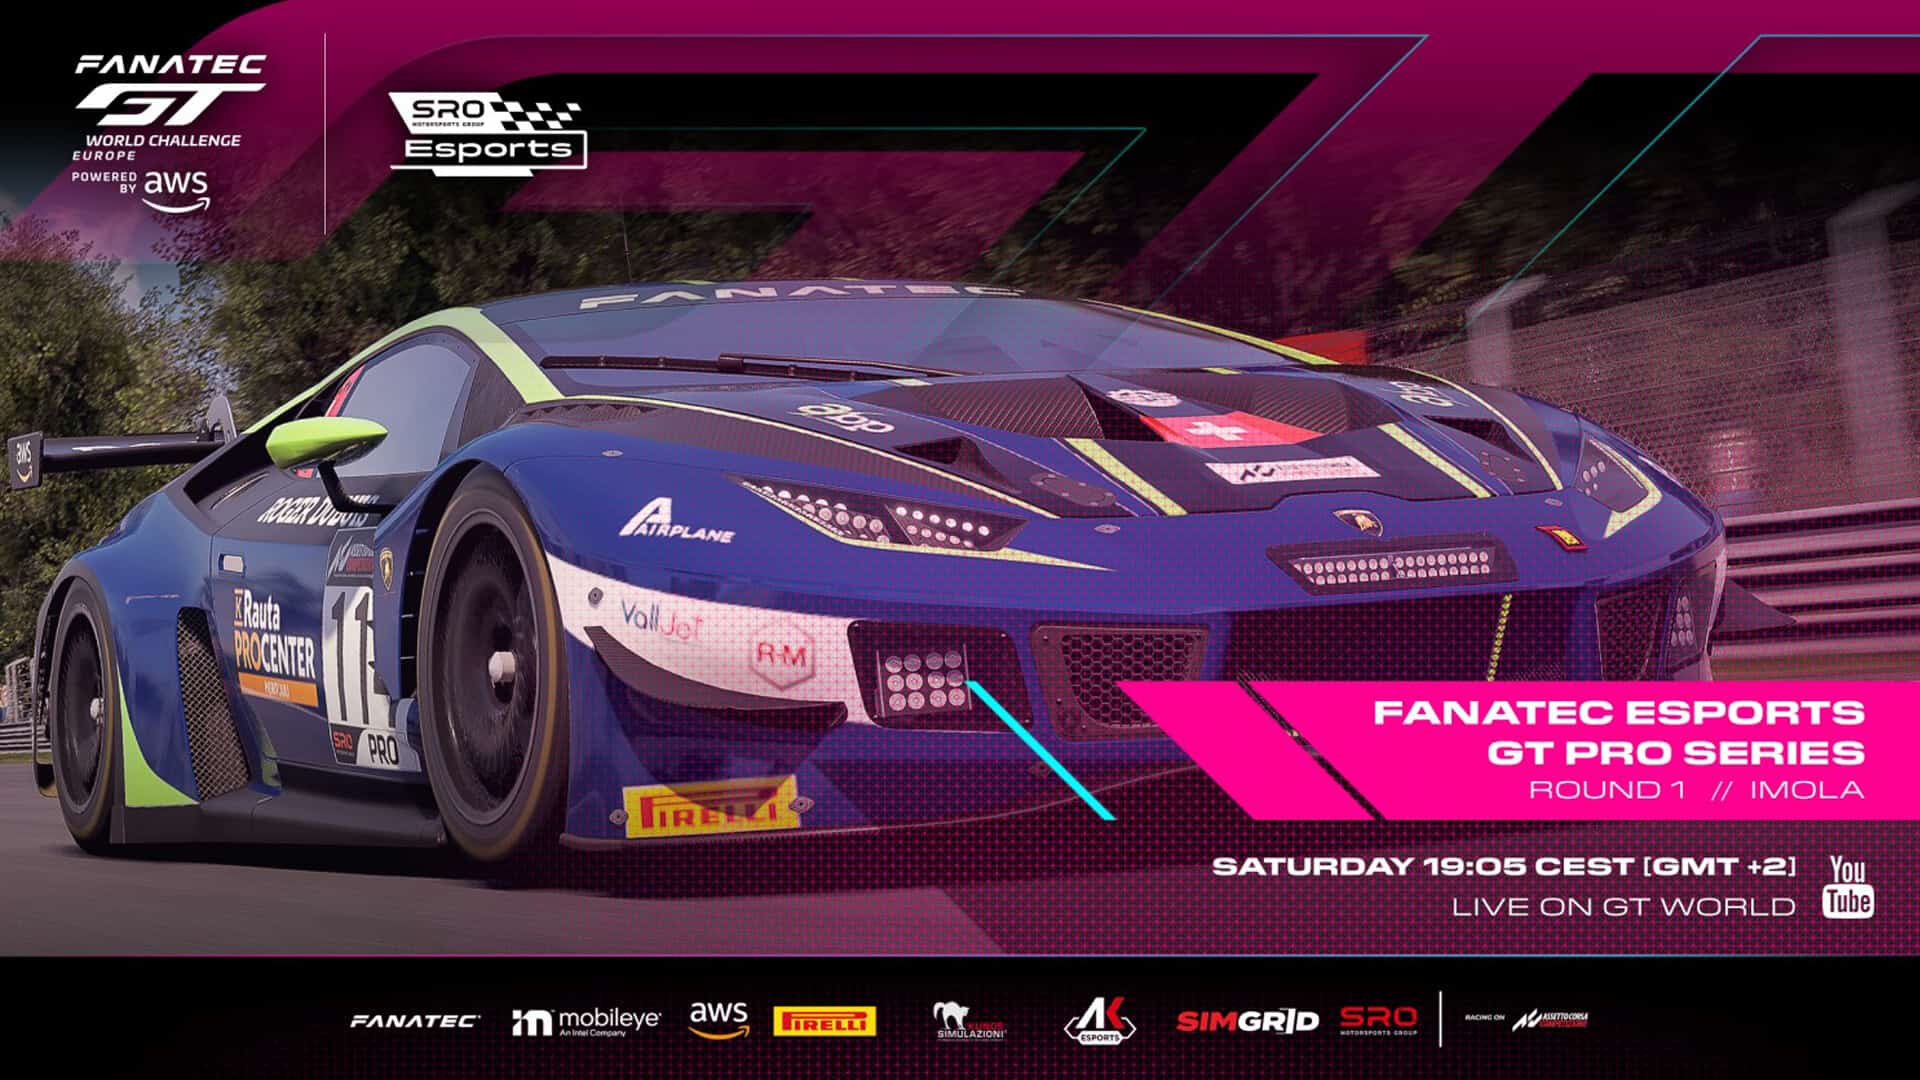 Fanatec Esports GT Pro Series continues to merge the virtual and real GT World Challenge worlds in 2022